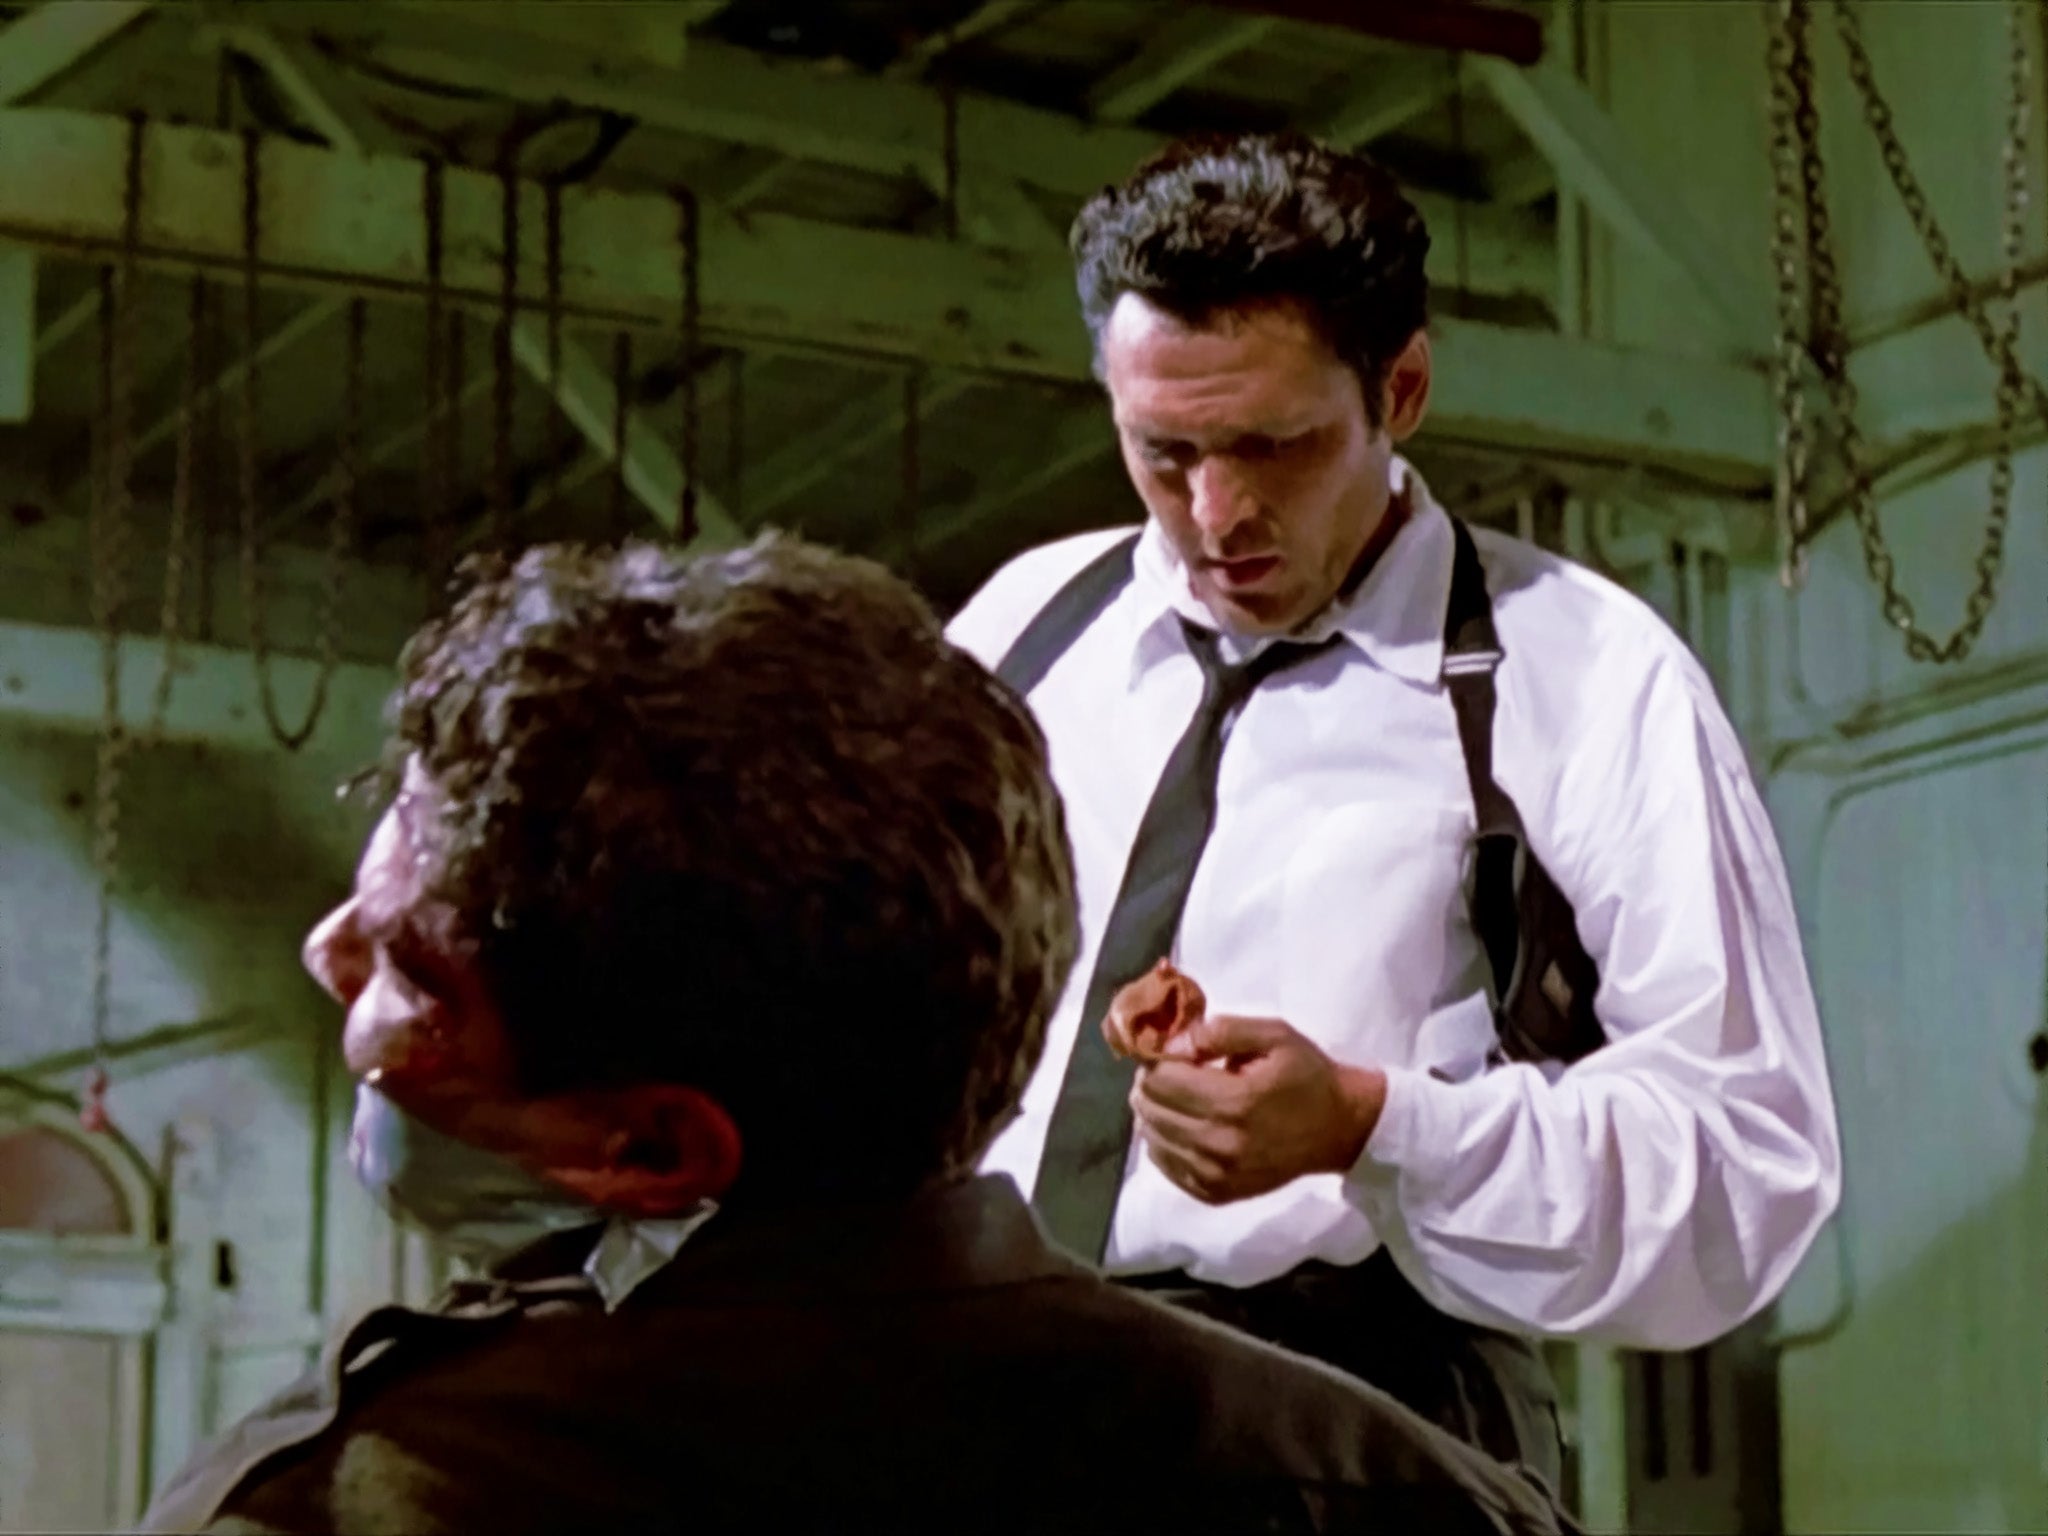 Michael Madsen as Mr Blonde in Quentin Tarantino’s ‘Reservoir Dogs’ in 1992 – he slices off a cop’s ear